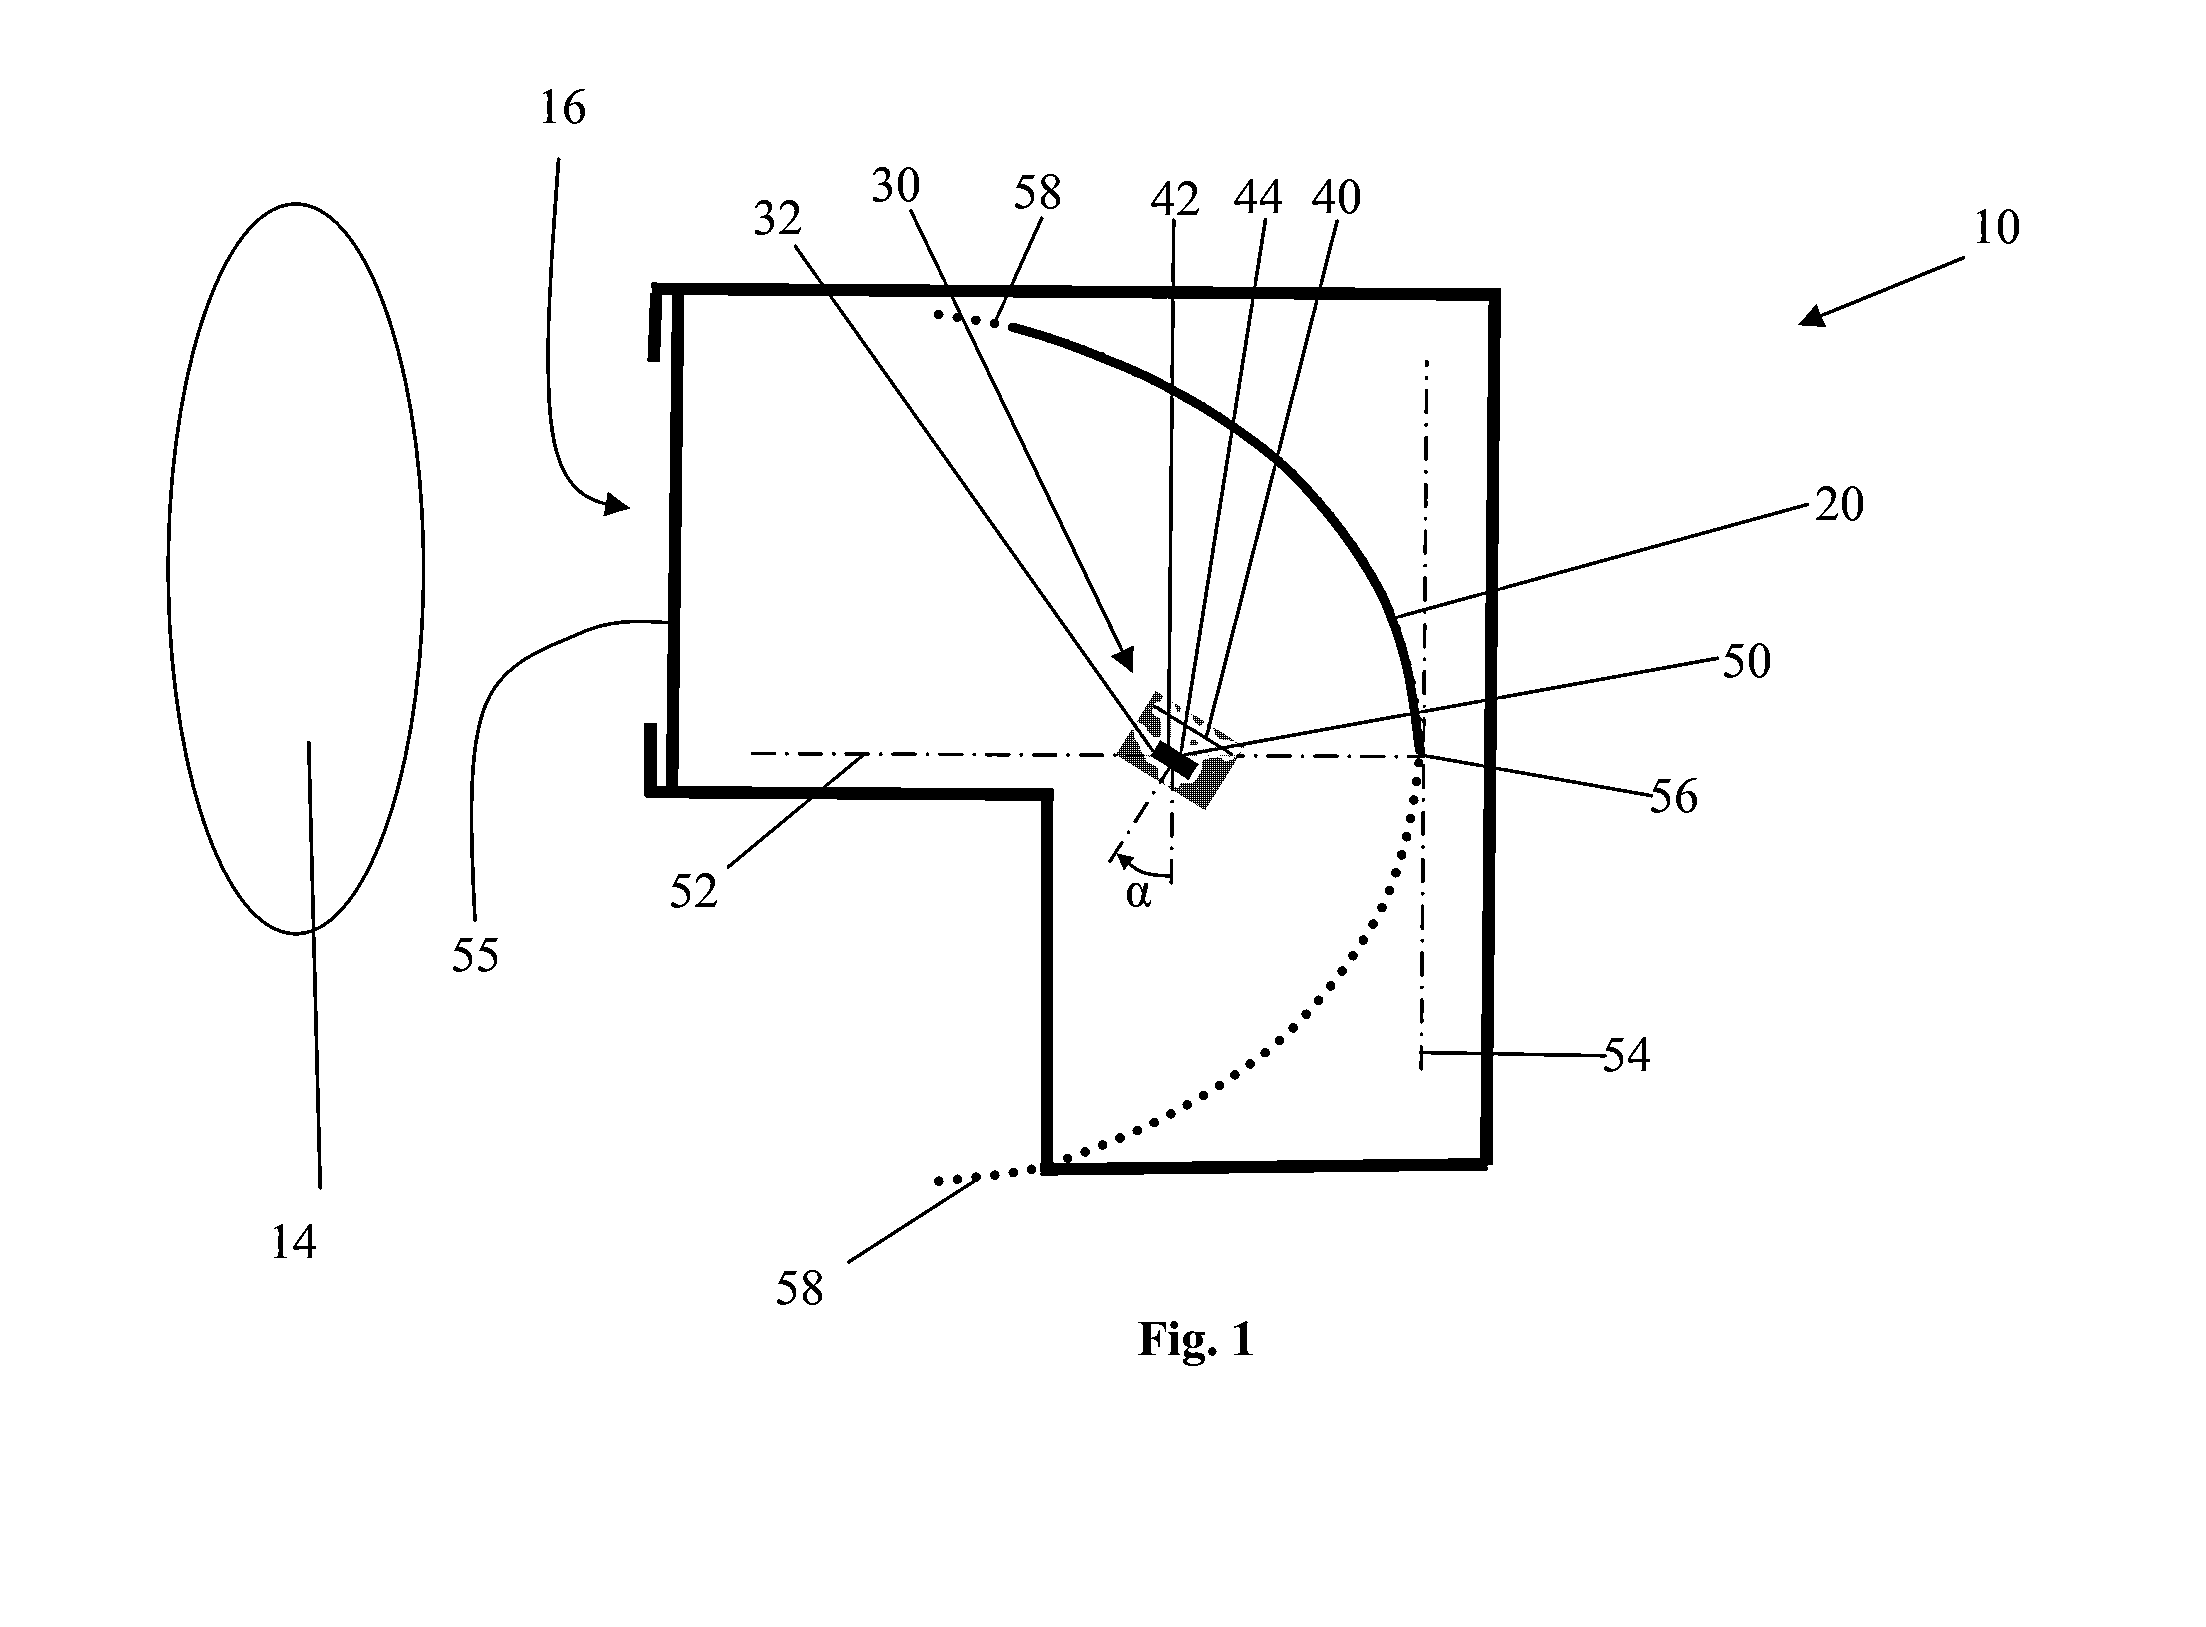 Medical thermometer having an improved optics system